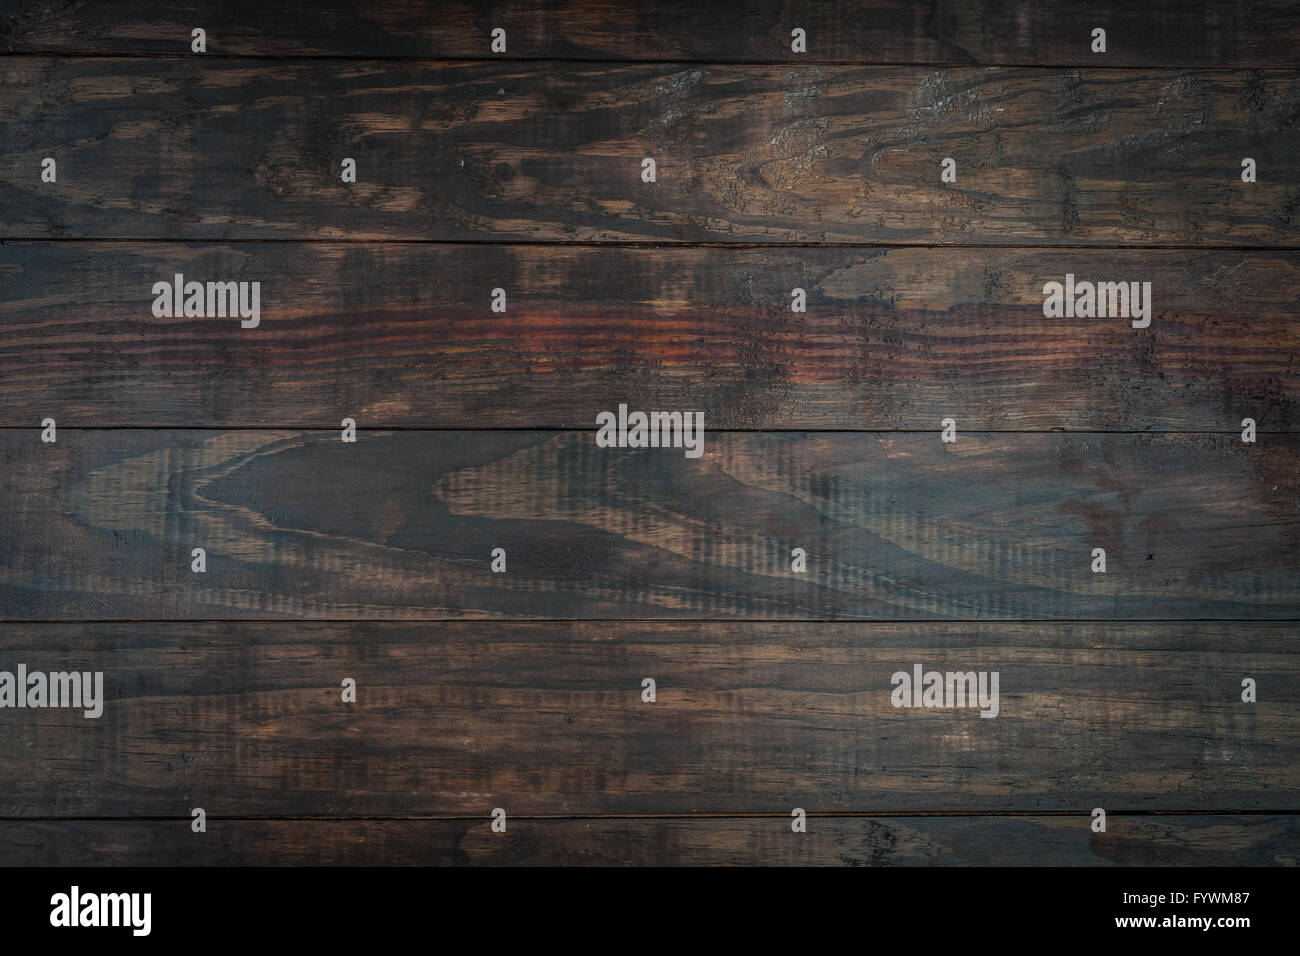 Grungy wooden background. Old rustic natural wood Stock Photo